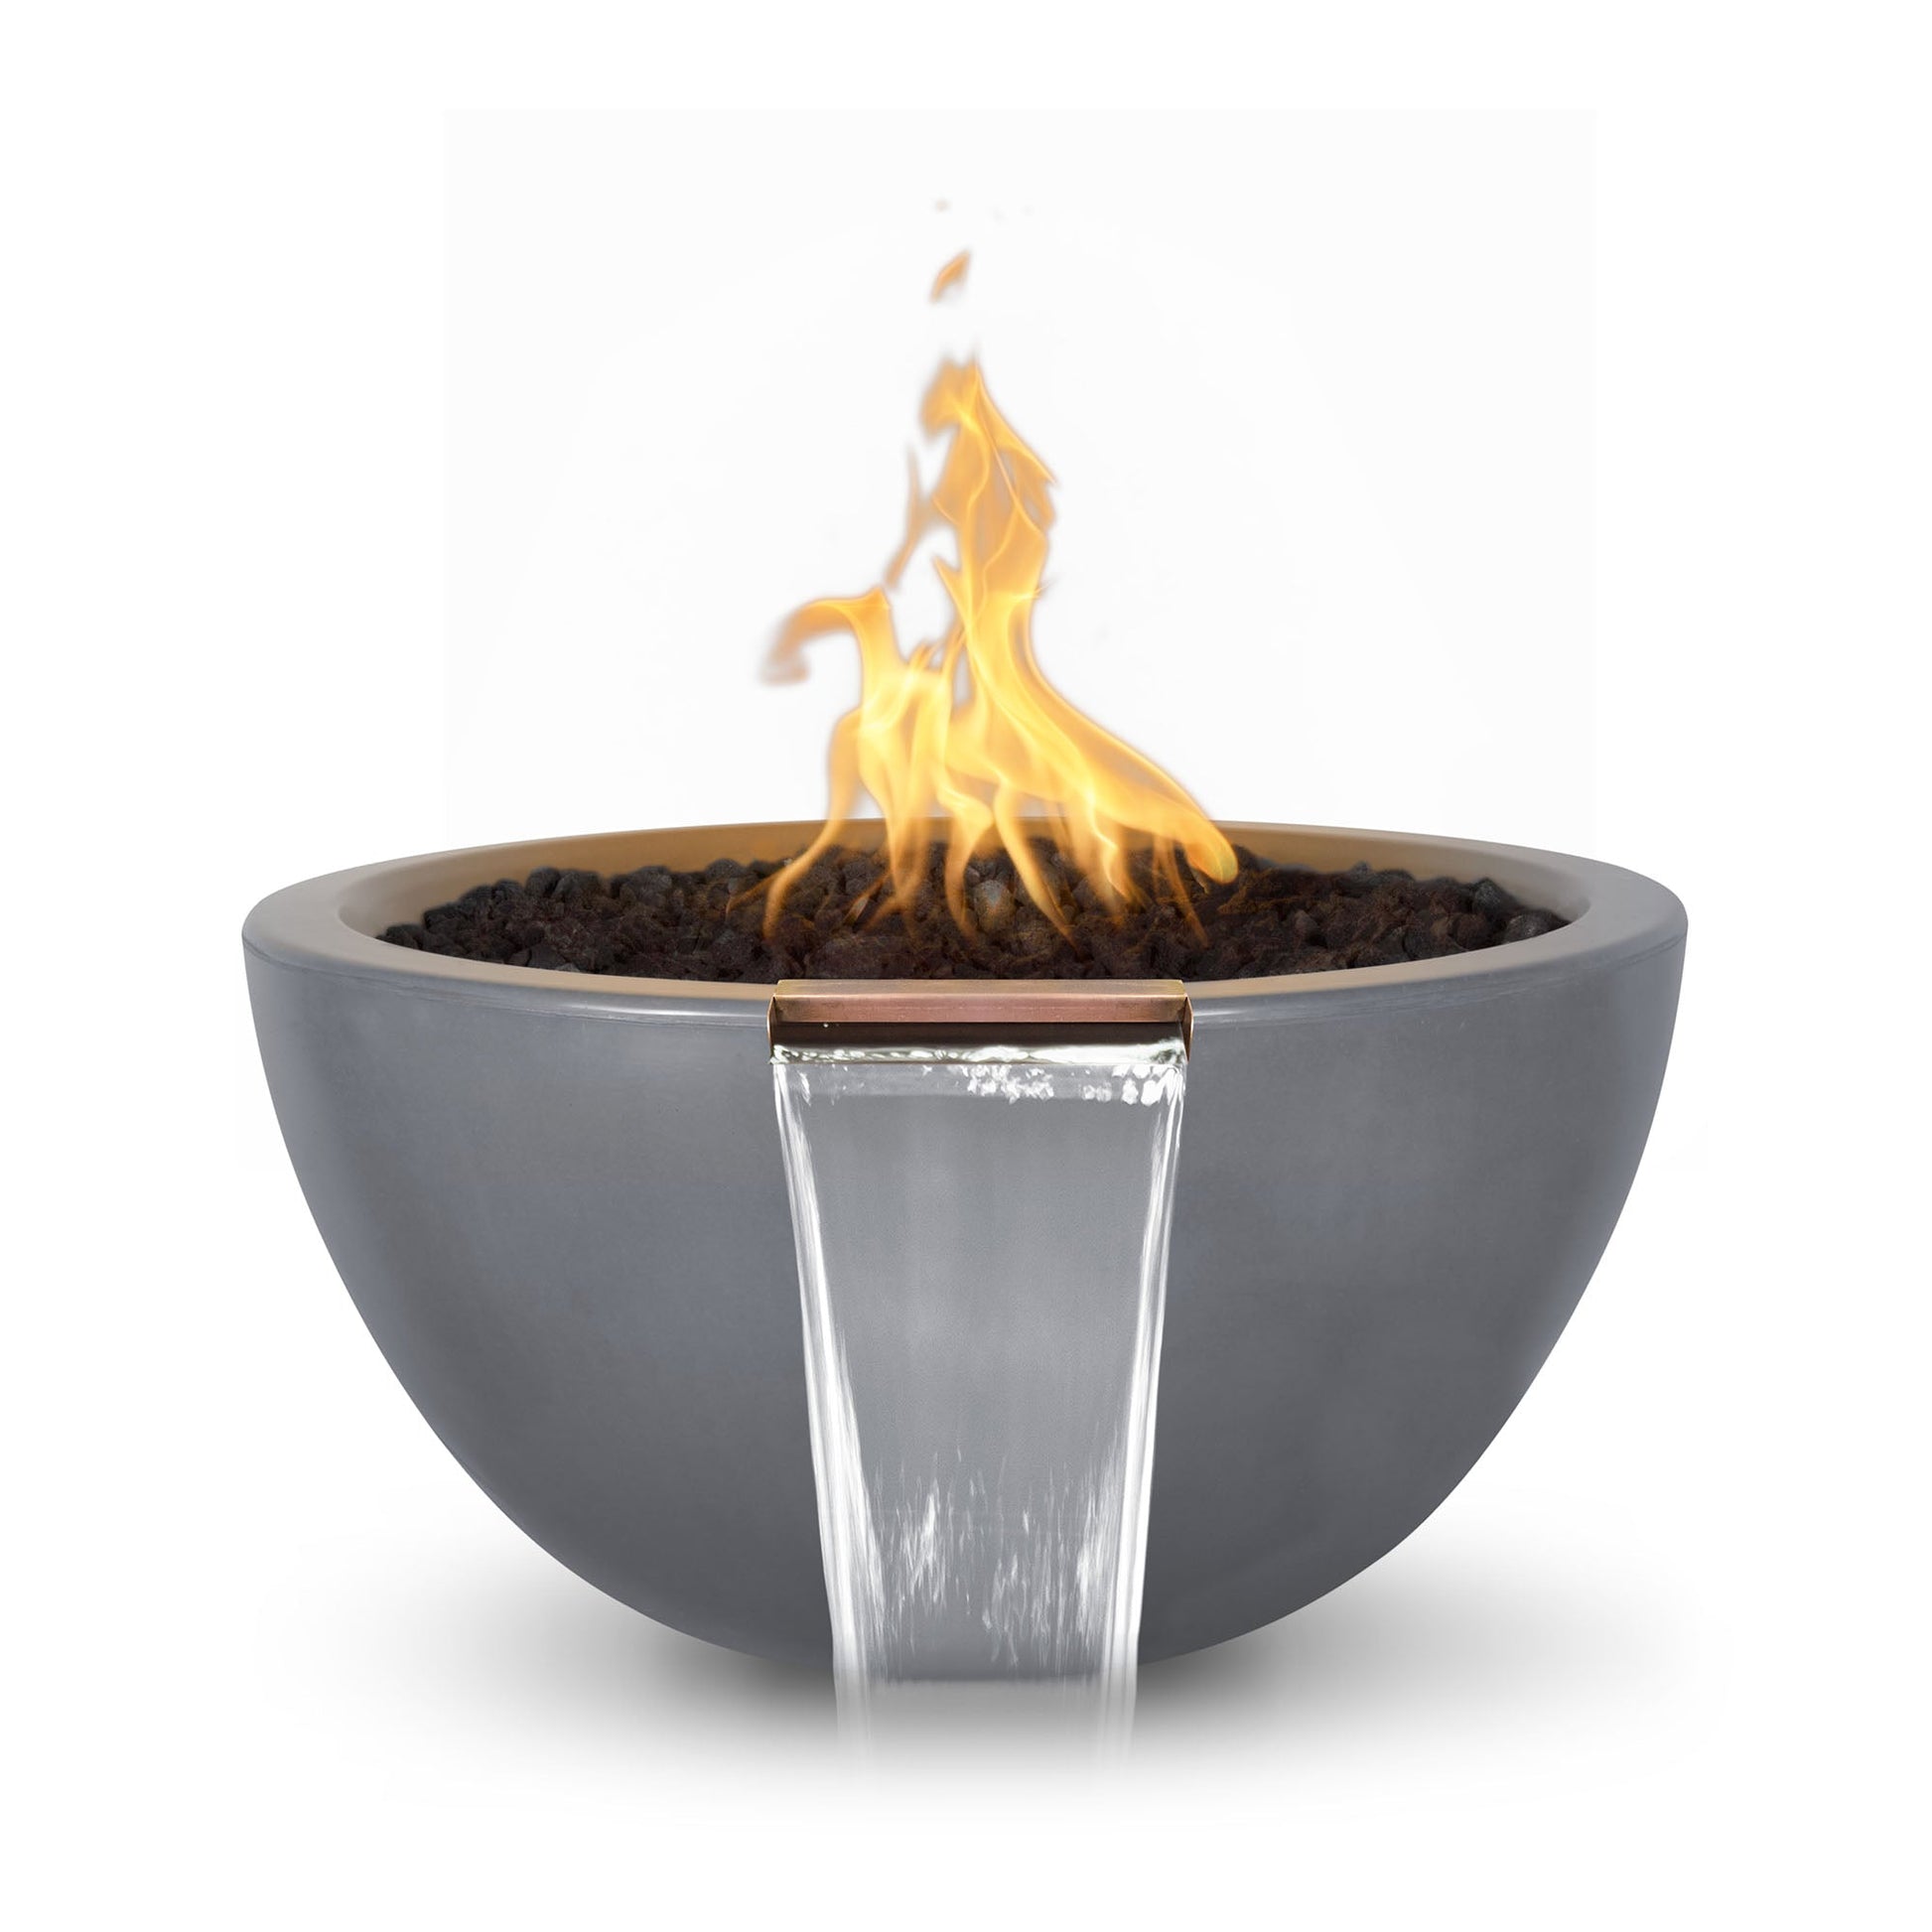 The Outdoor Plus Round Luna 30" Metallic Silver GFRC Concrete Natural Gas Fire & Water Bowl with Match Lit with Flame Sense Ignition